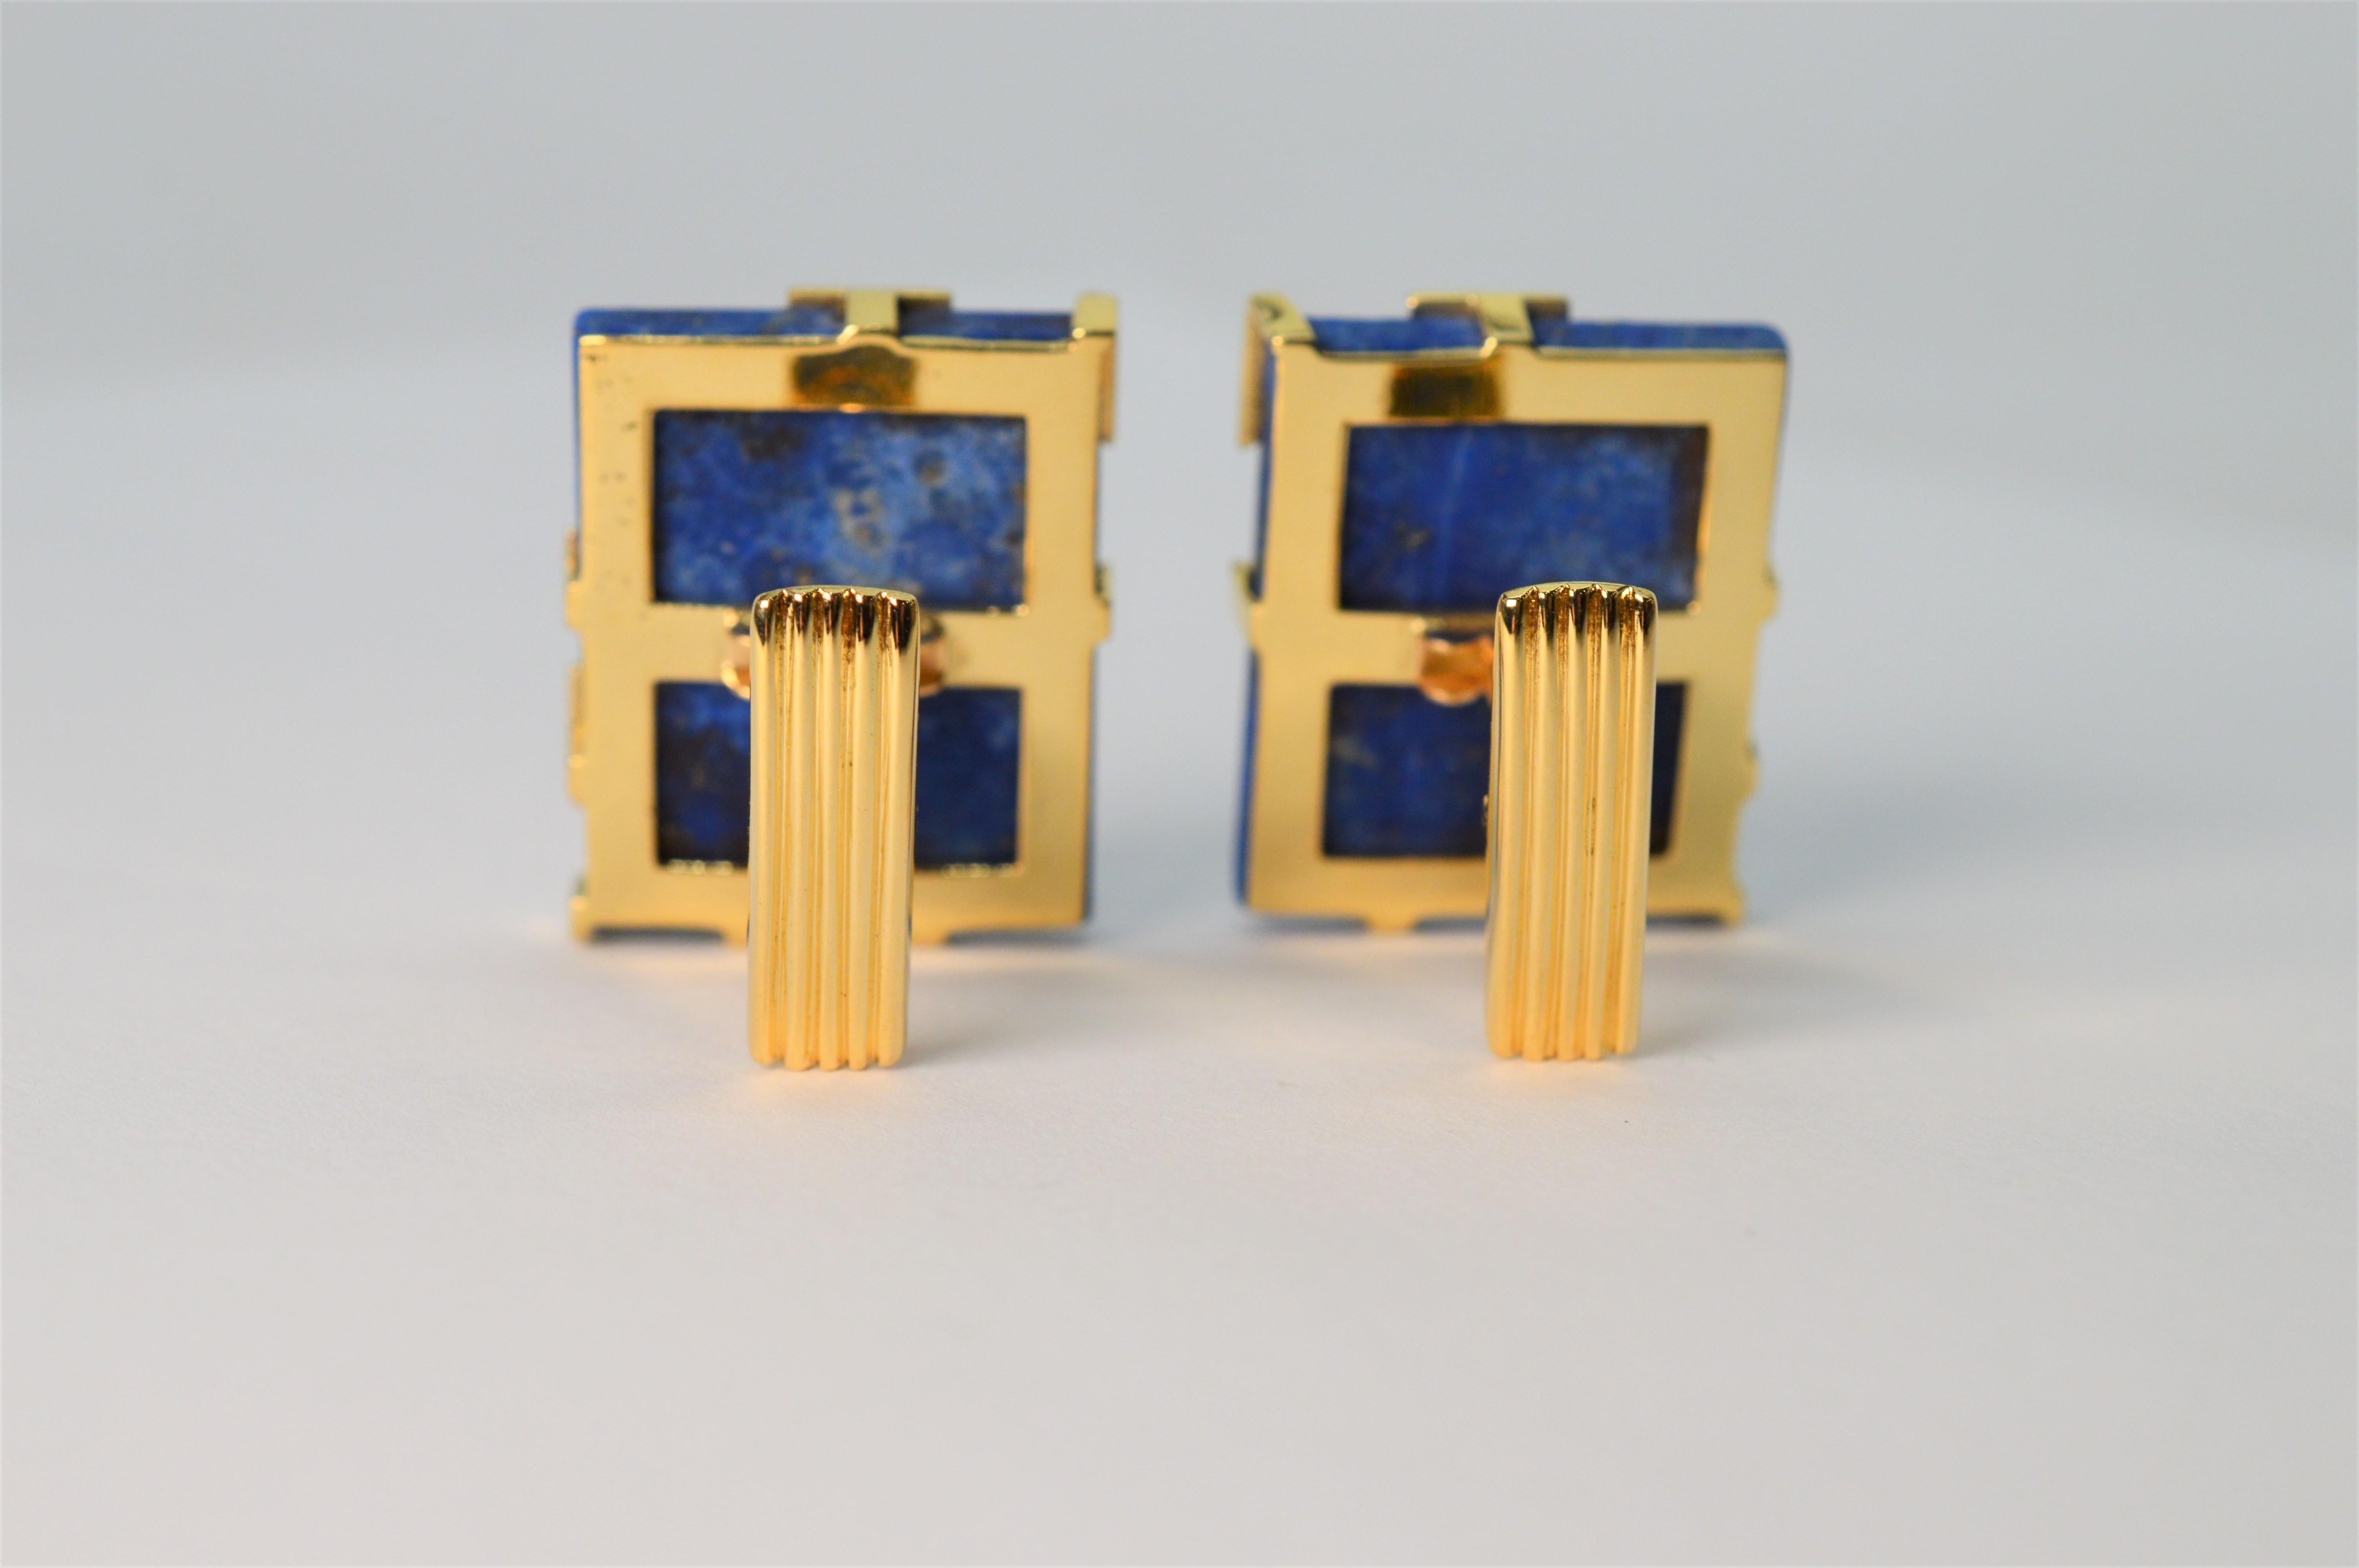 Vivid blue lapis lazuli stone tiles accented with eighteen 18k yellow gold create this modernist pair of unisex cufflinks. With an artful circular pattern, gold partially overlays the blue stone letting the blue color and natural  beauty of the